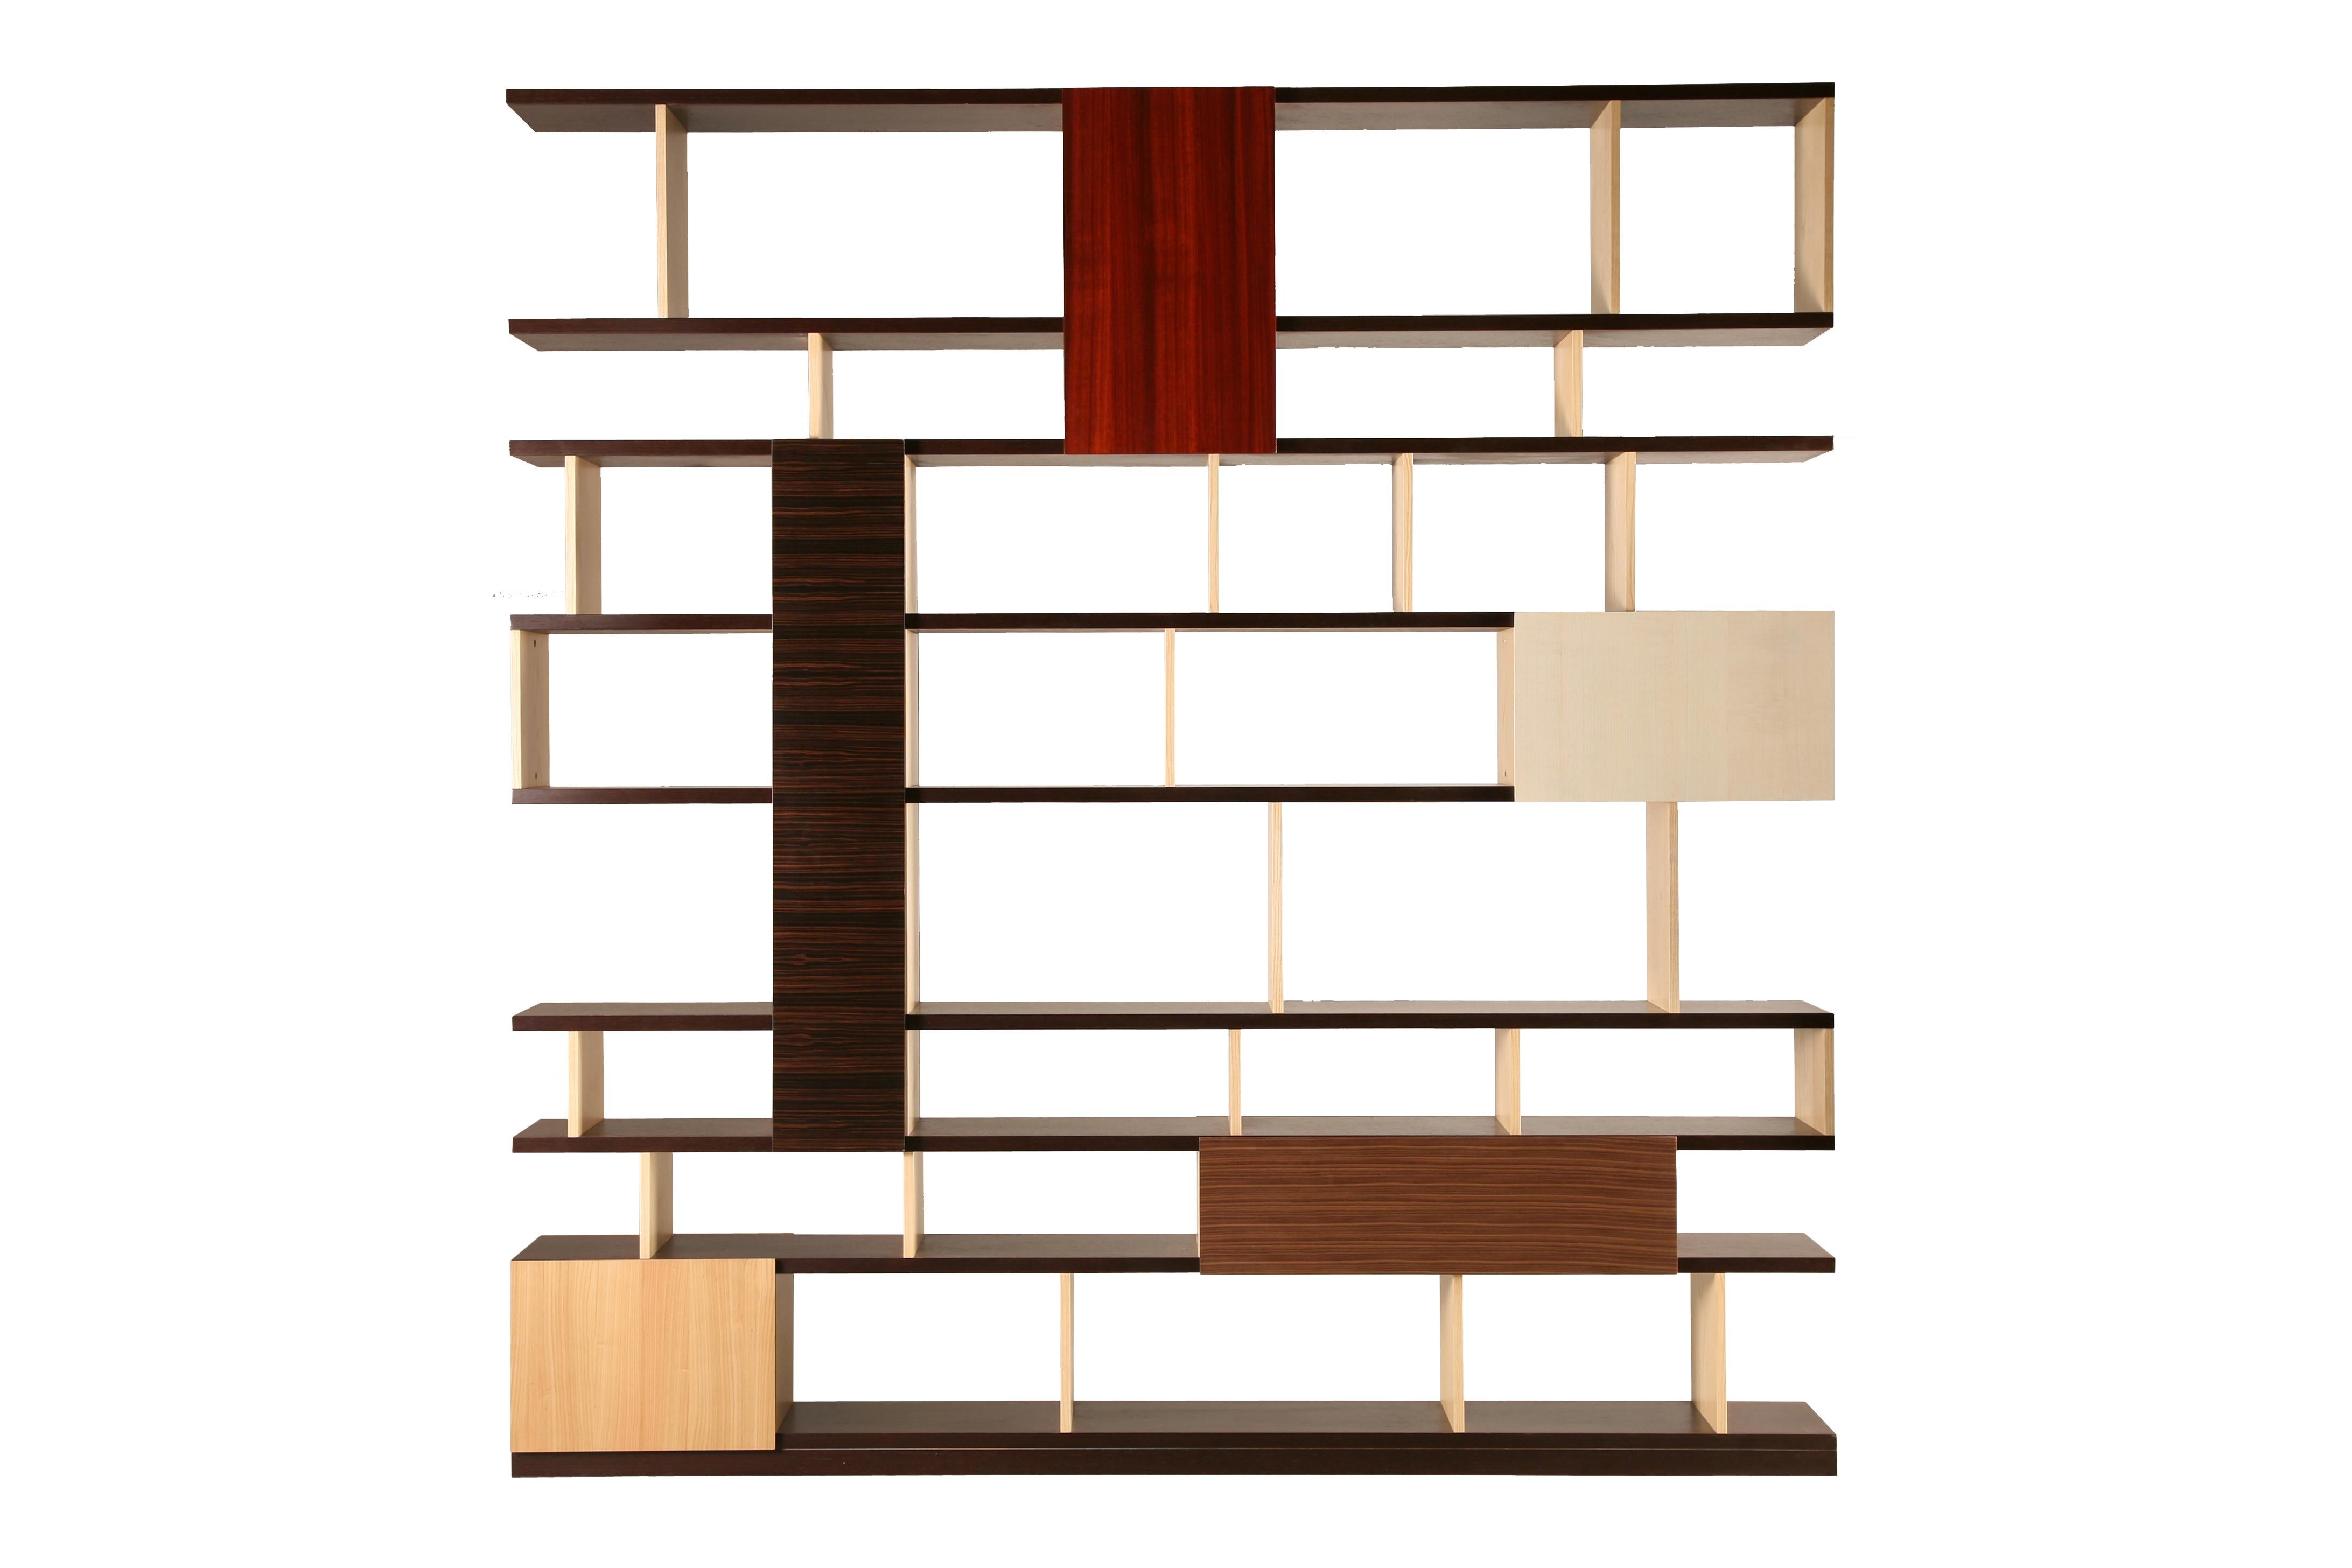 Babilonia is a Contemporary style freestanding bookshelf with doors made of wengé, ash, maple, cherry, ebony, walnut and padouk woods

The structure is made of ash and wengé.

Designed by Maurizio Duranti

Made in italy by Morelato.